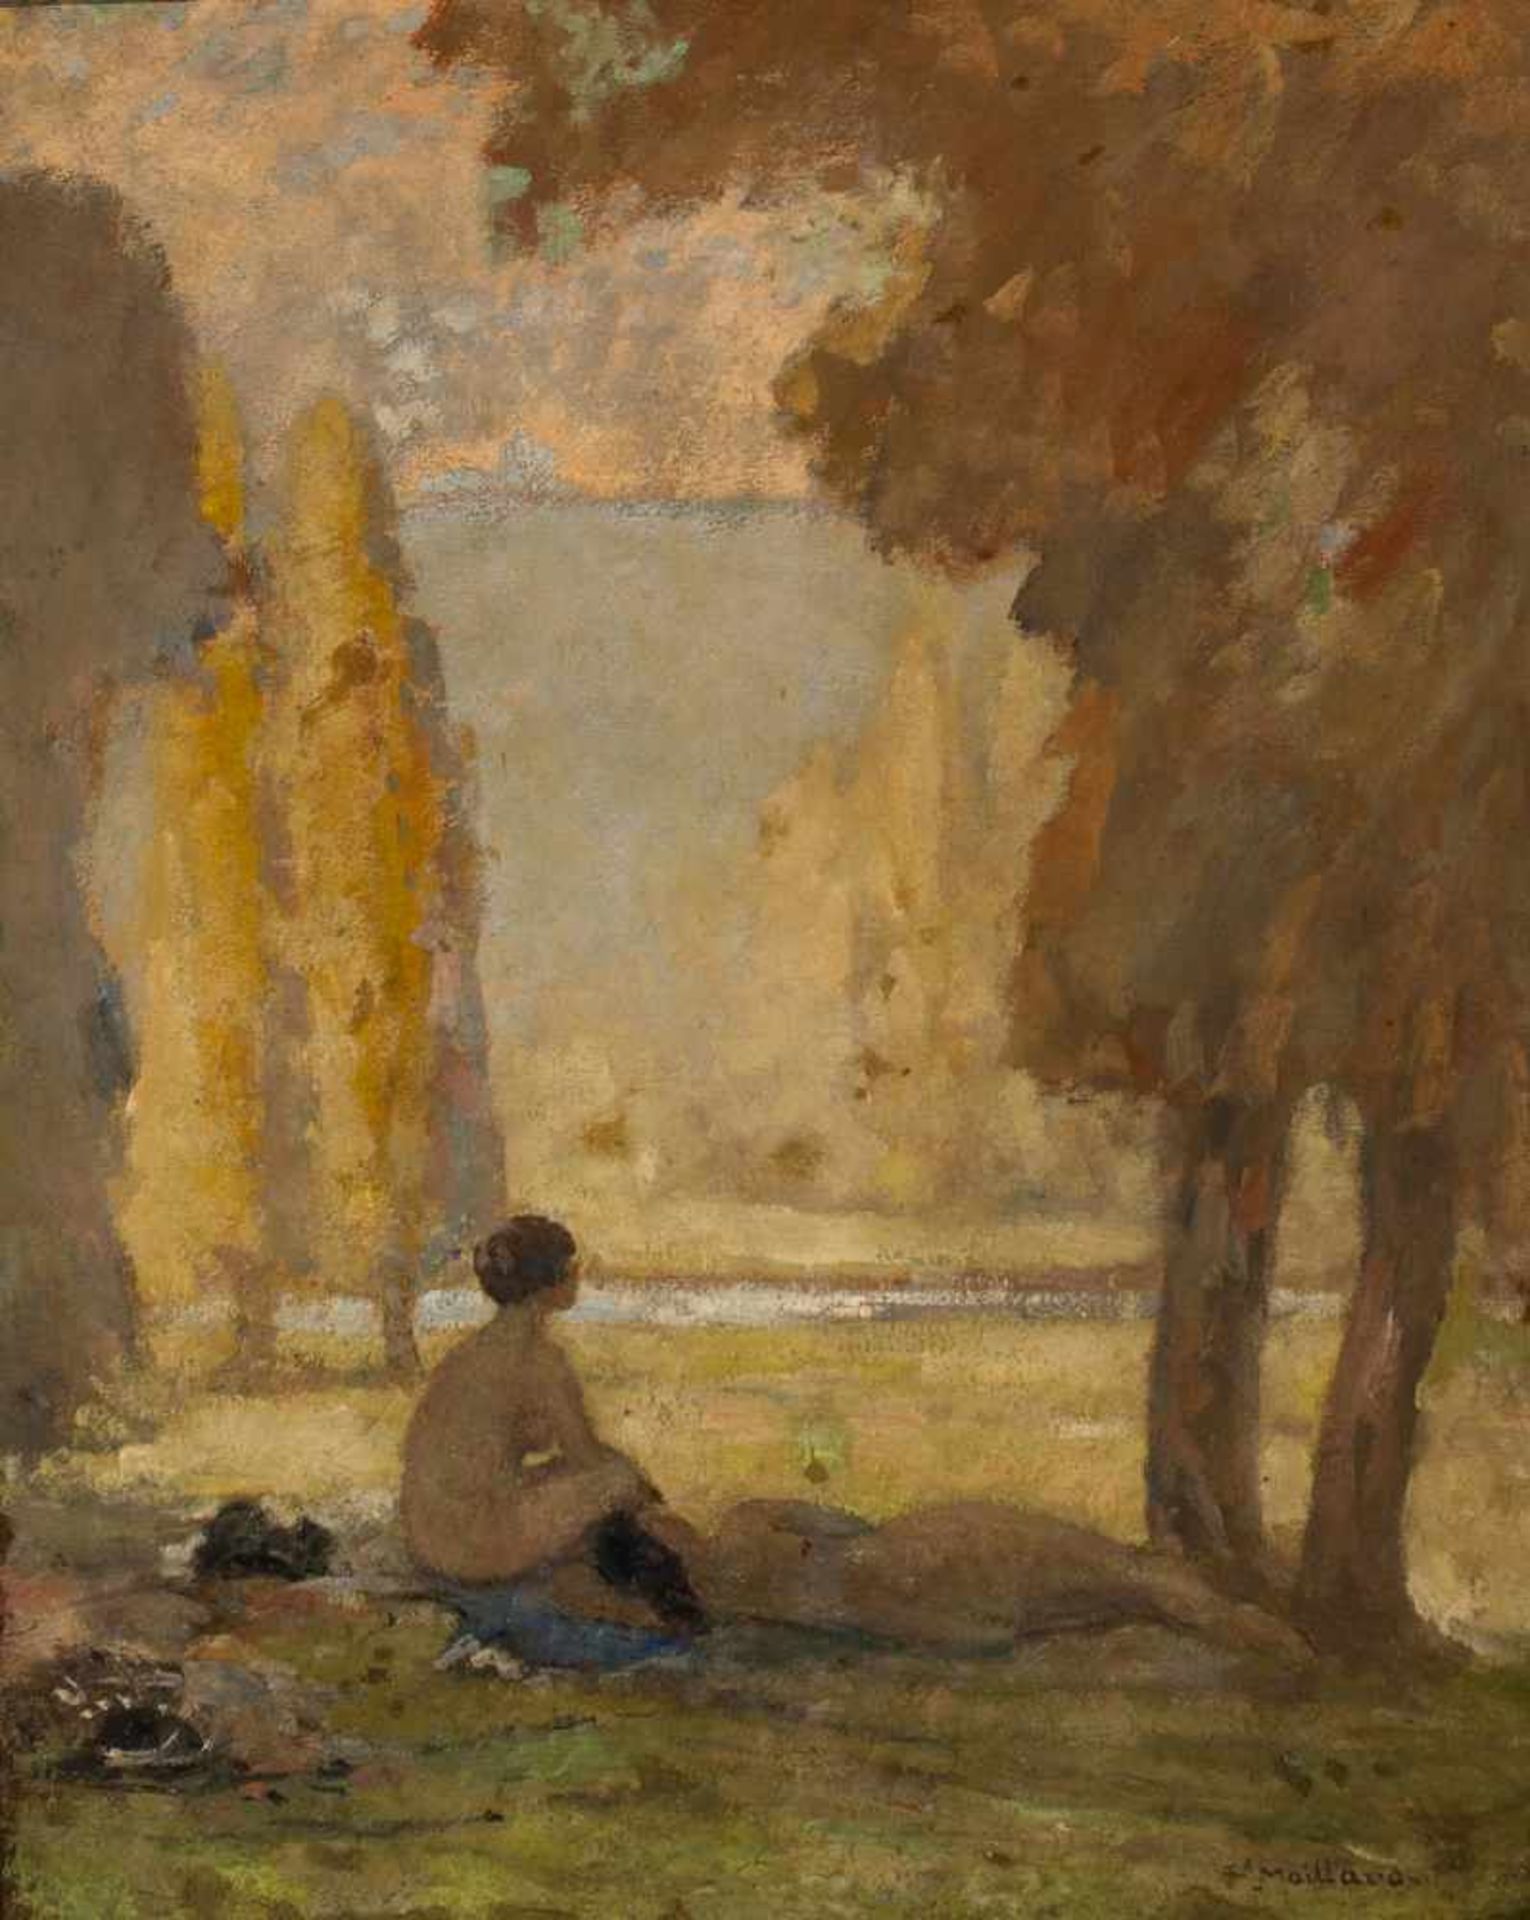 Fernad Maillaud (France, 1863 - 1948)"Lake with bather"Oil on canvas. Signed. Carved and gilded